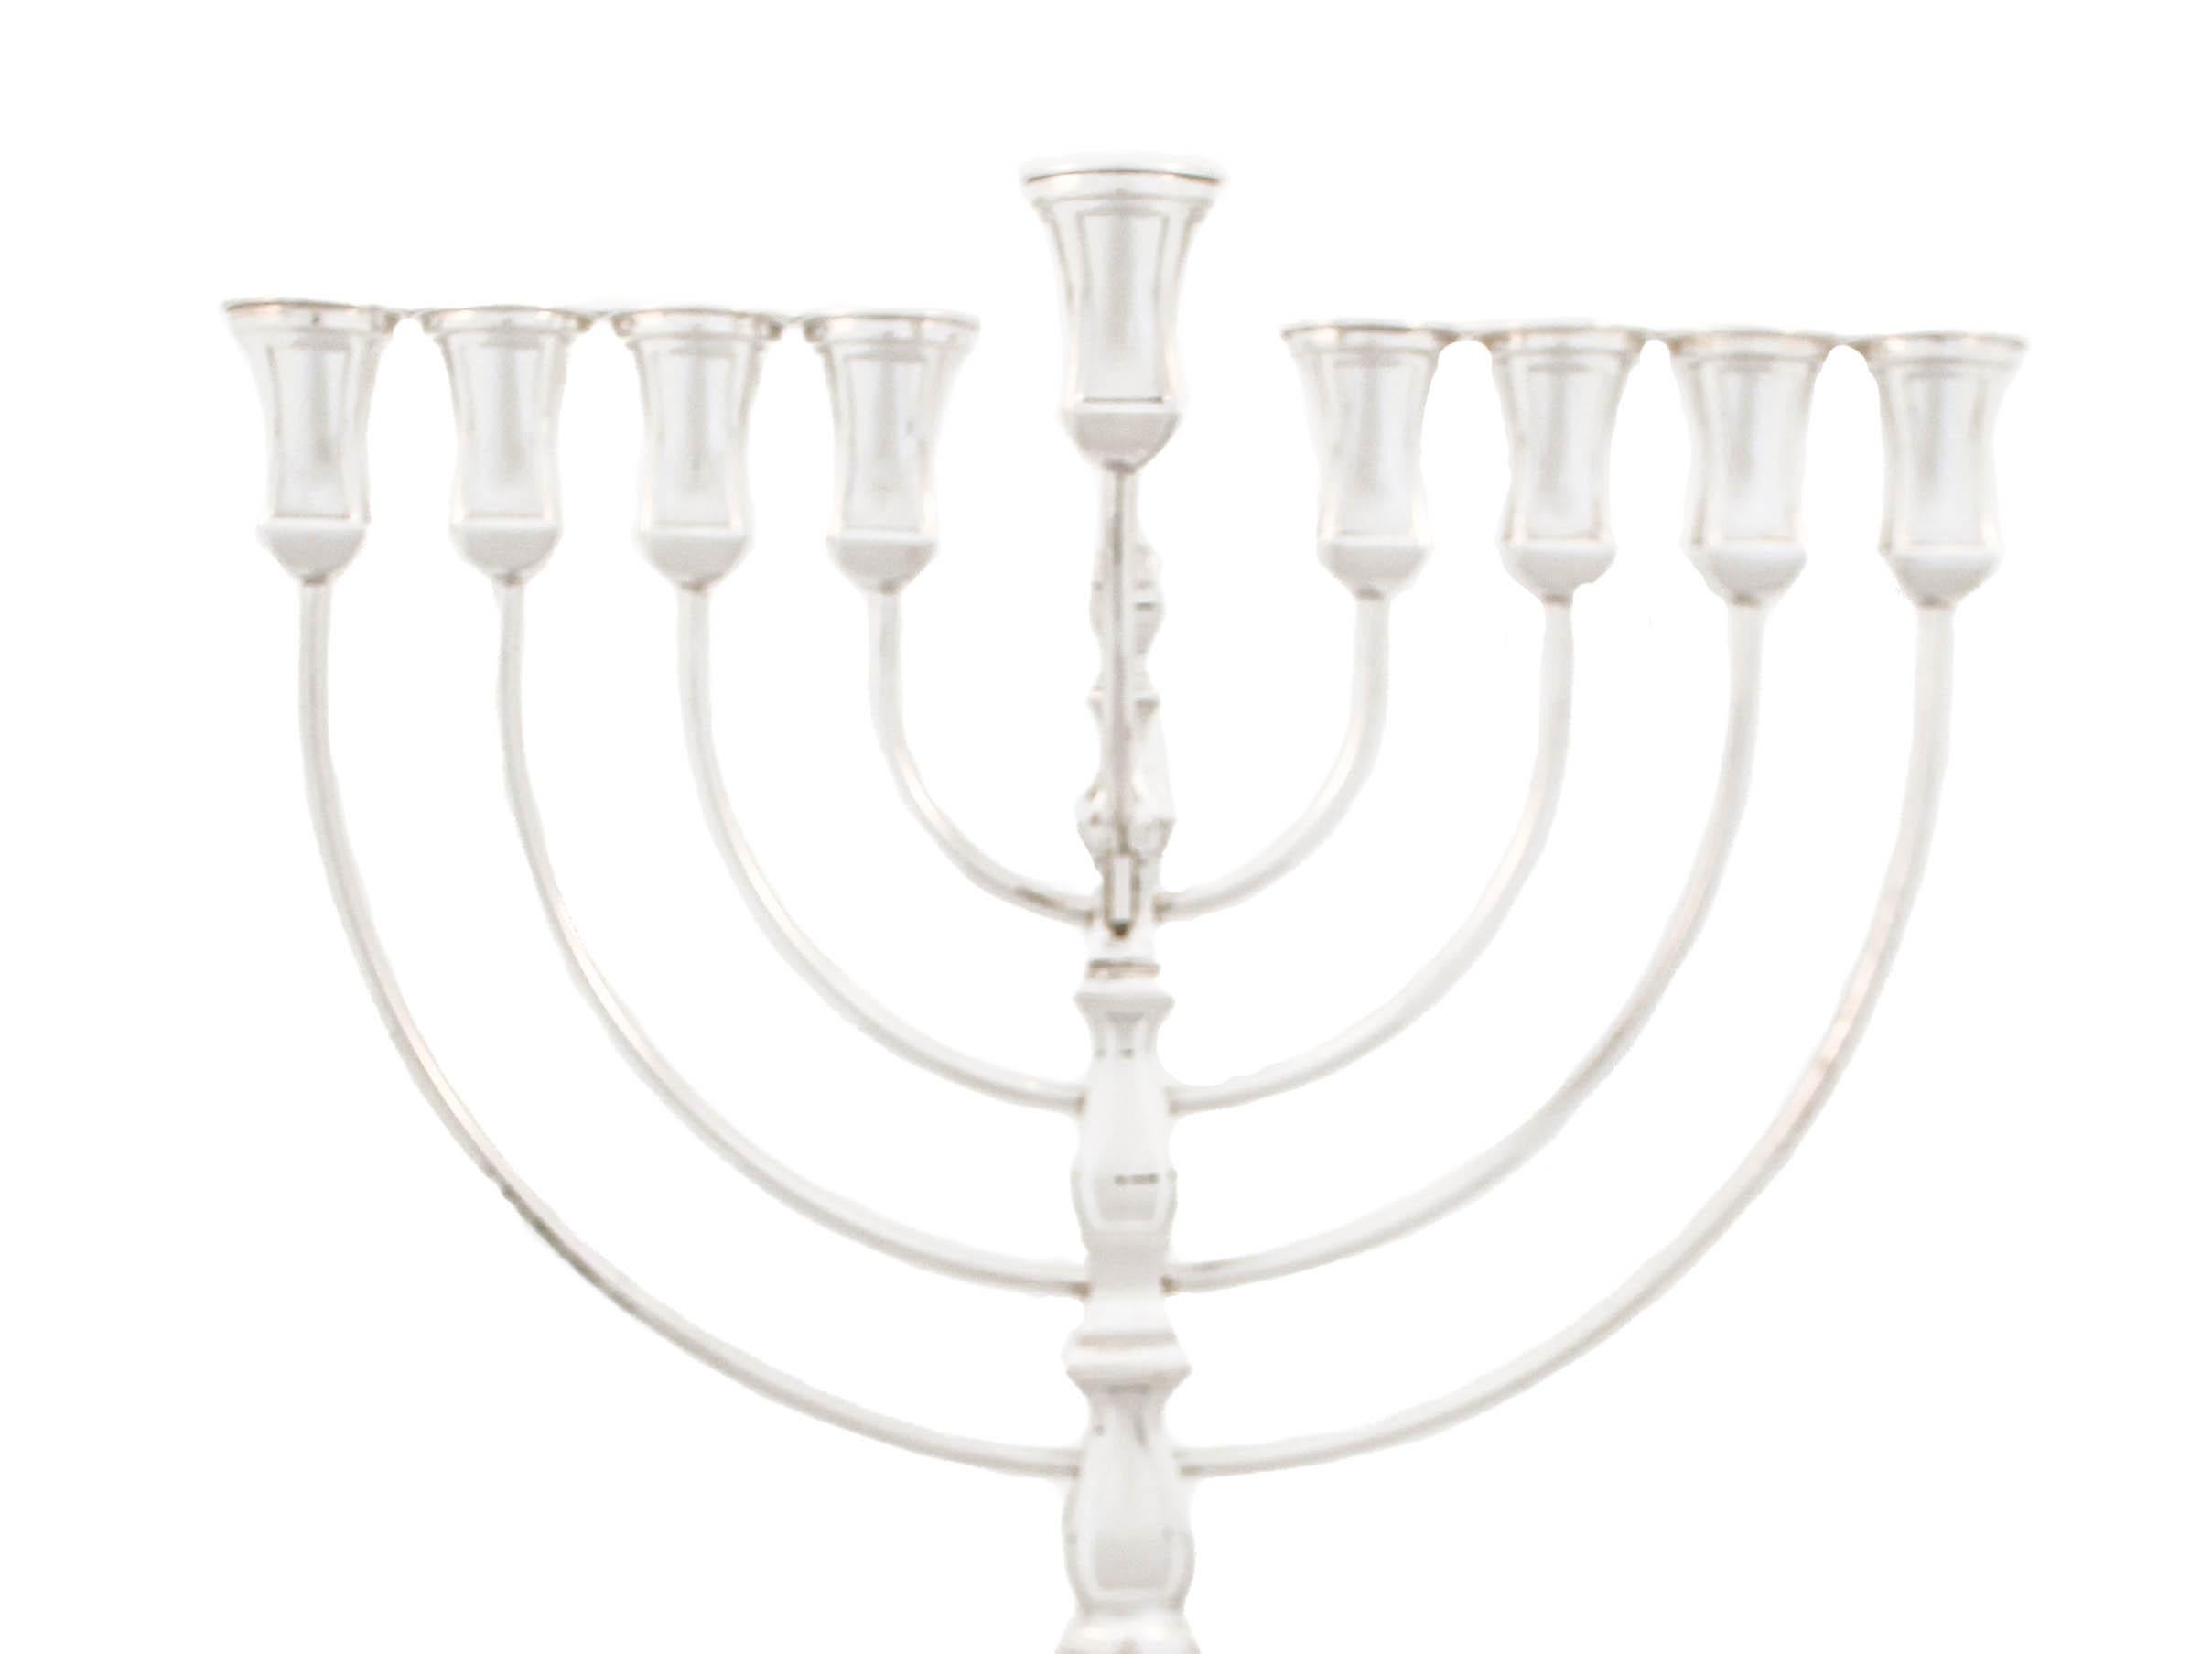 Being offered is a new sterling silver menorah.  Made in Israel it is modern and has a masculine feel with its straight lines and square shape.  The top and bottom unscrew in the center for easy storage.  It has a timeless classic design and a regal